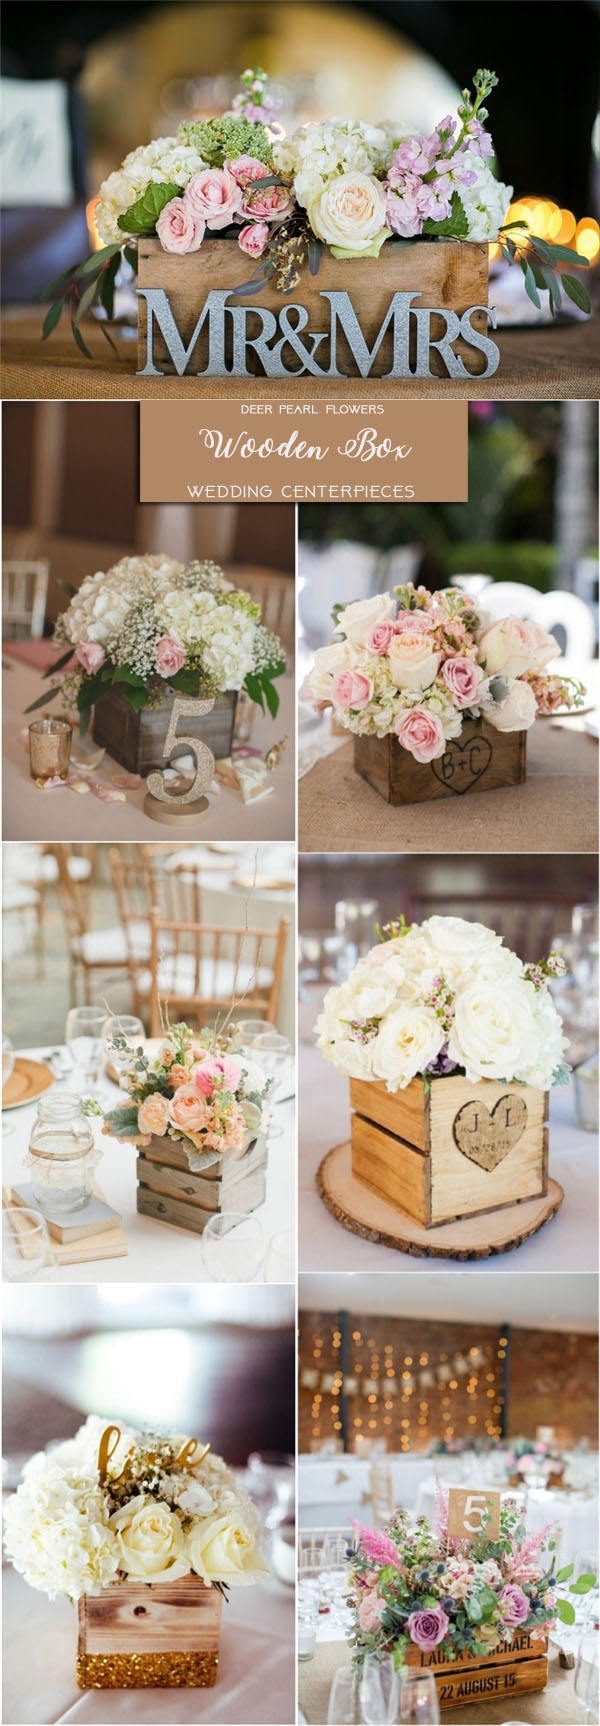 Rustic country wooden box wedding centerpieces